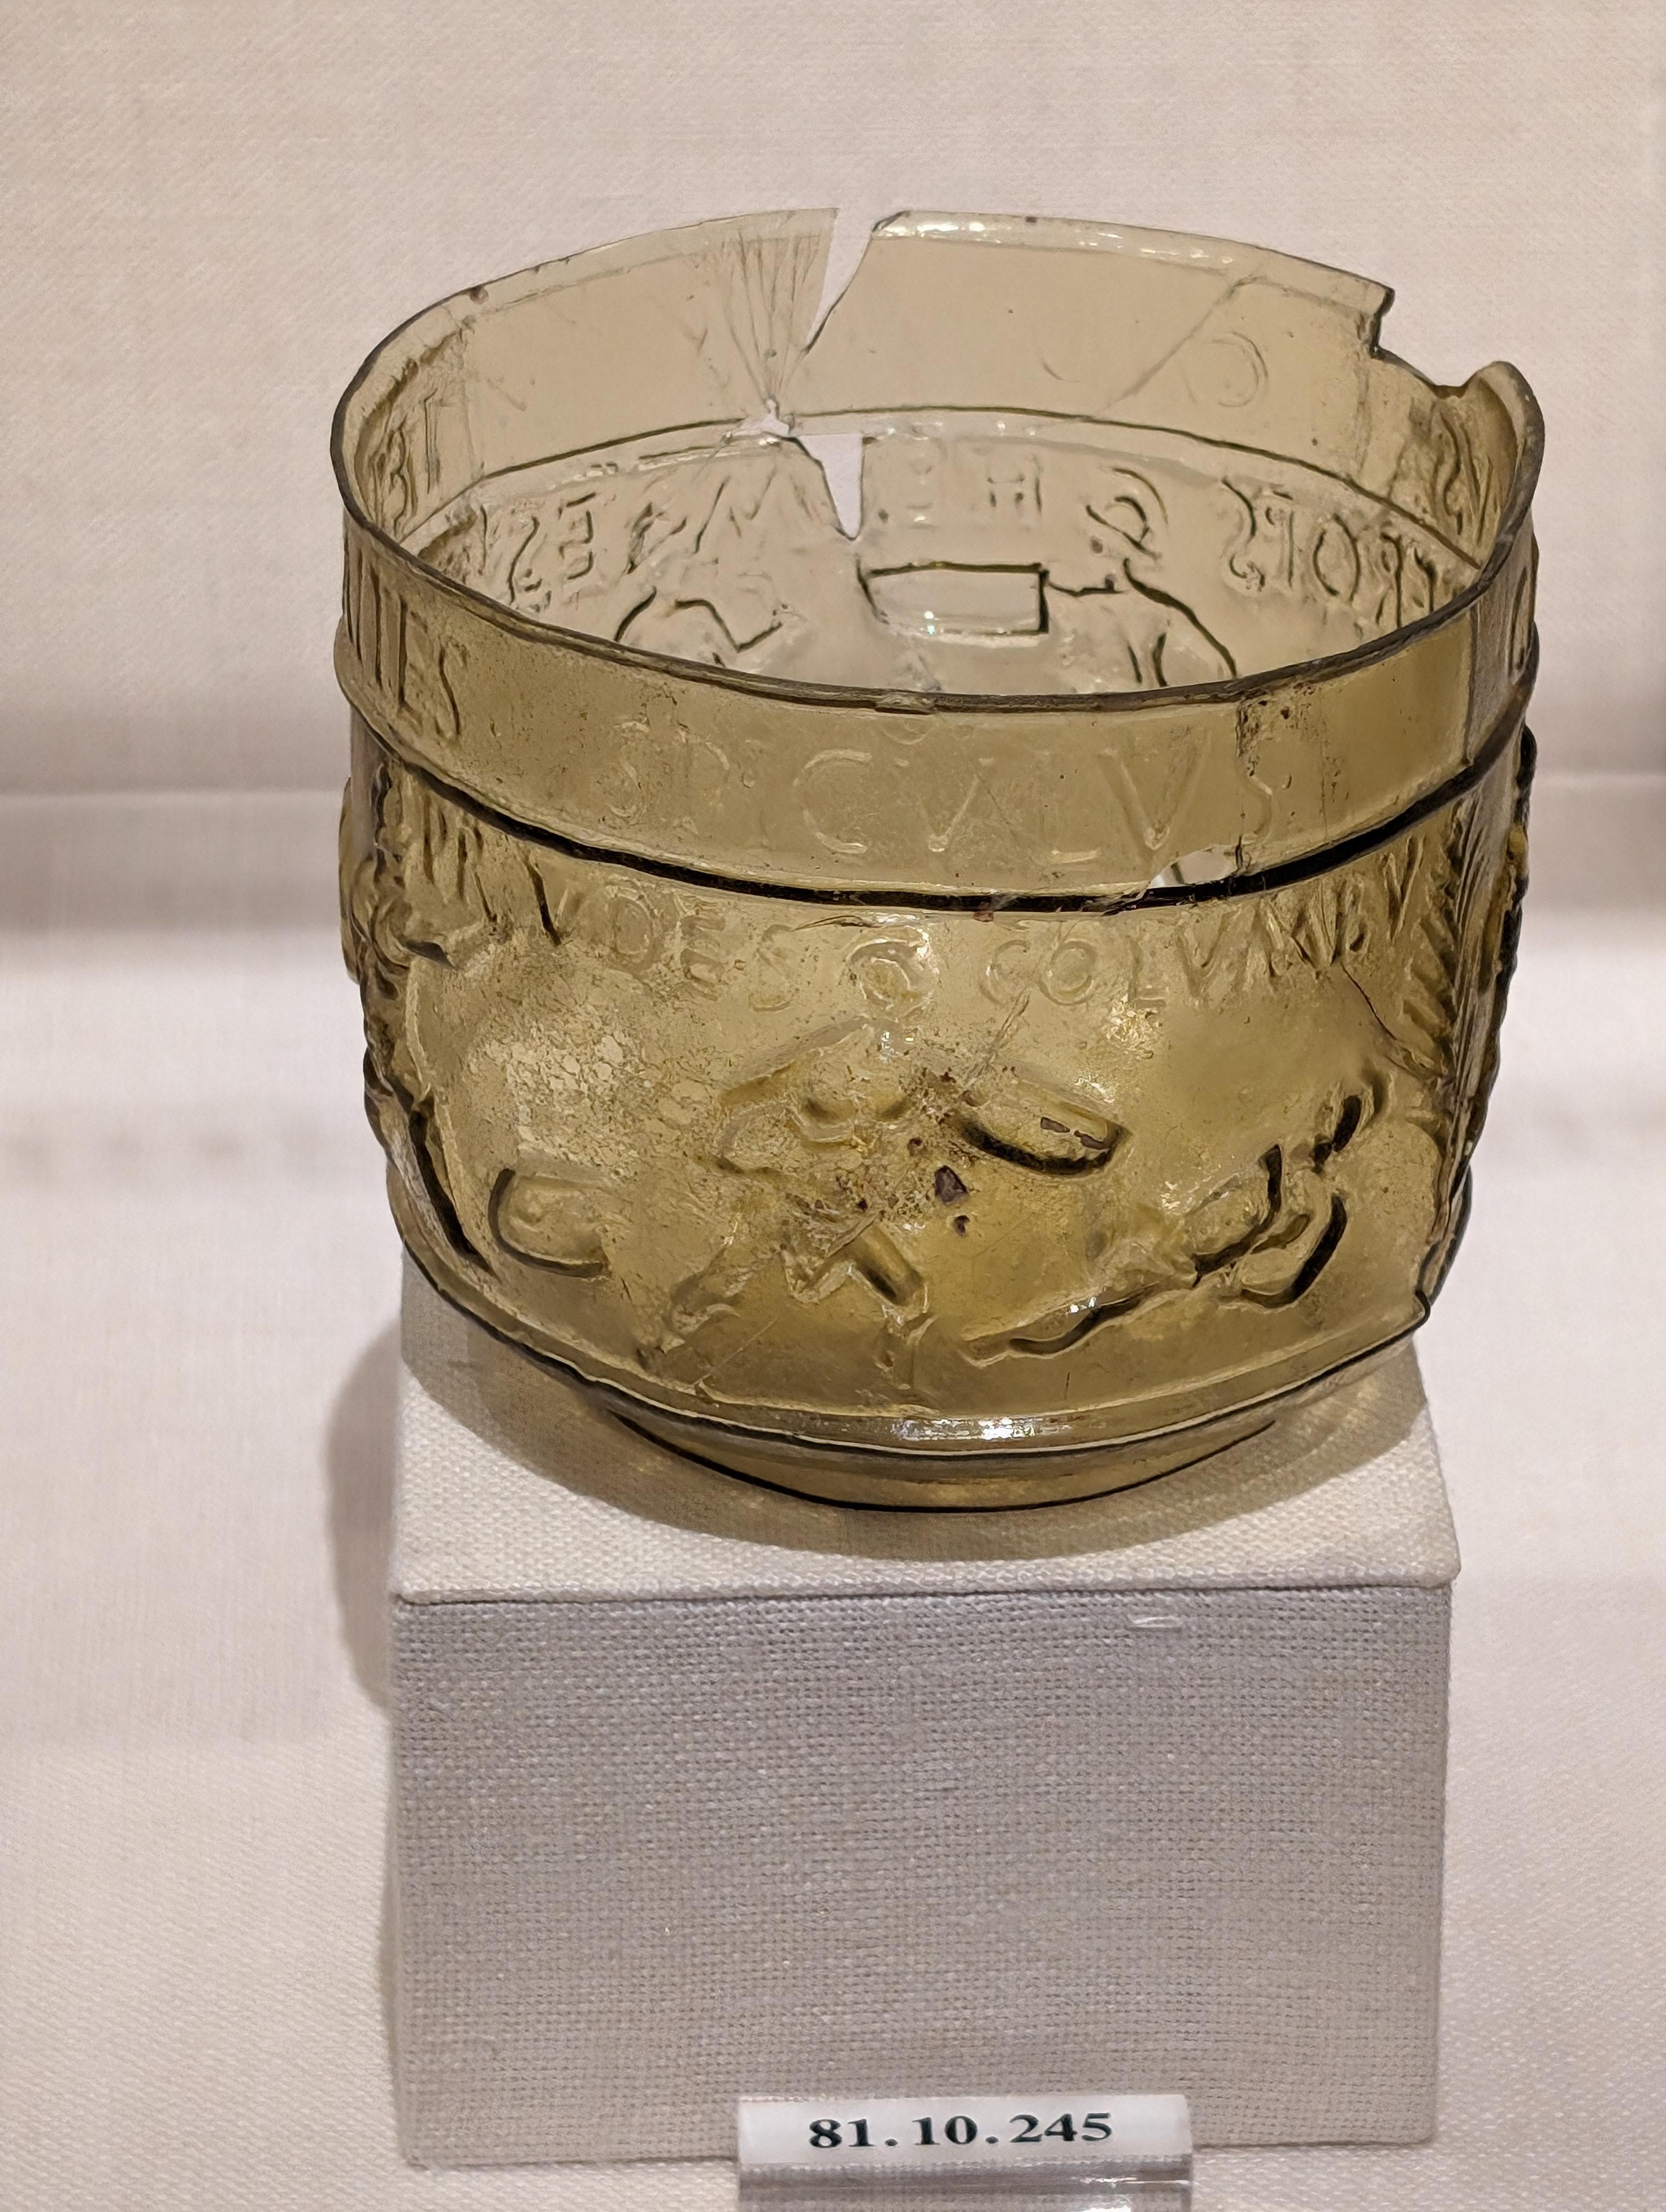 Roman glass souvenir cup bearing the images and names of gladiators popular in Rome at the time, 50-80CE.jpeg